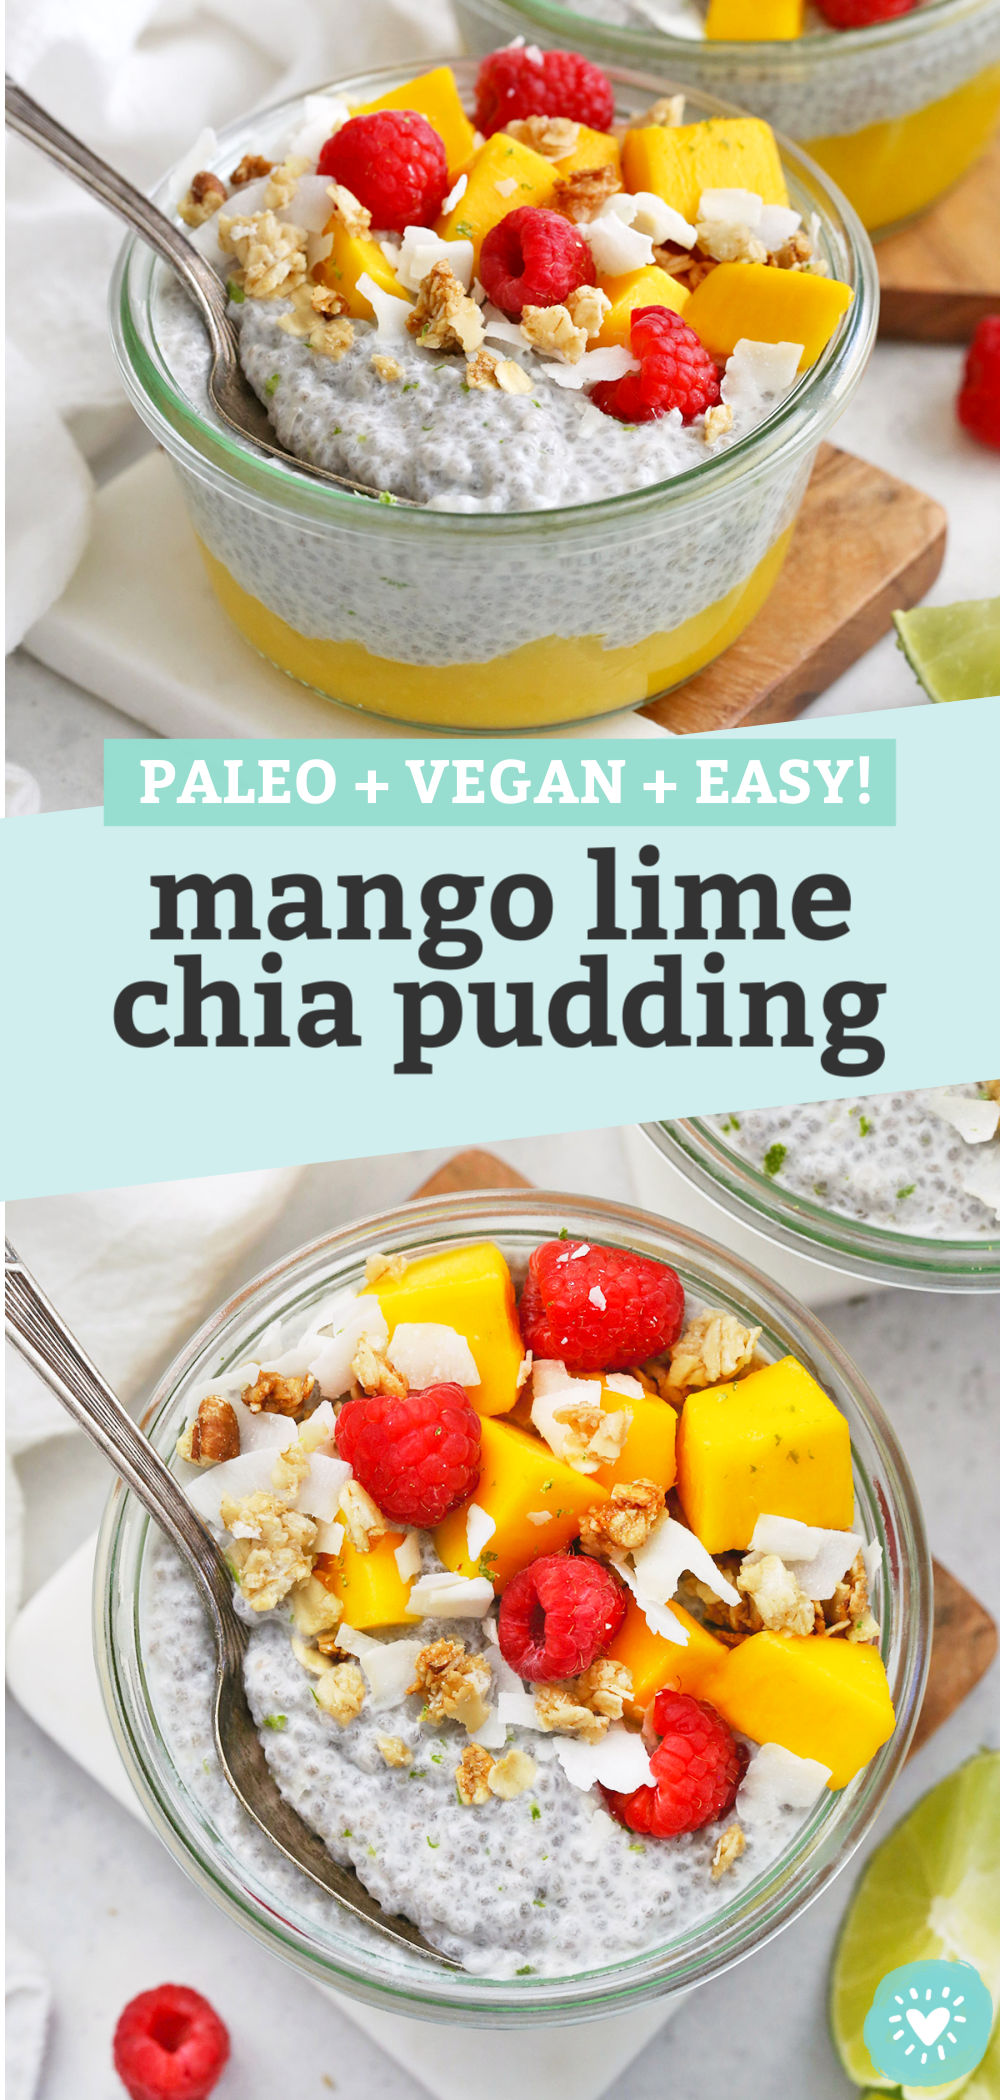 Collage of images of mango chia pudding in jars with text that reads "Paleo + Vegan + Easy Mango Lime Chia Pudding"